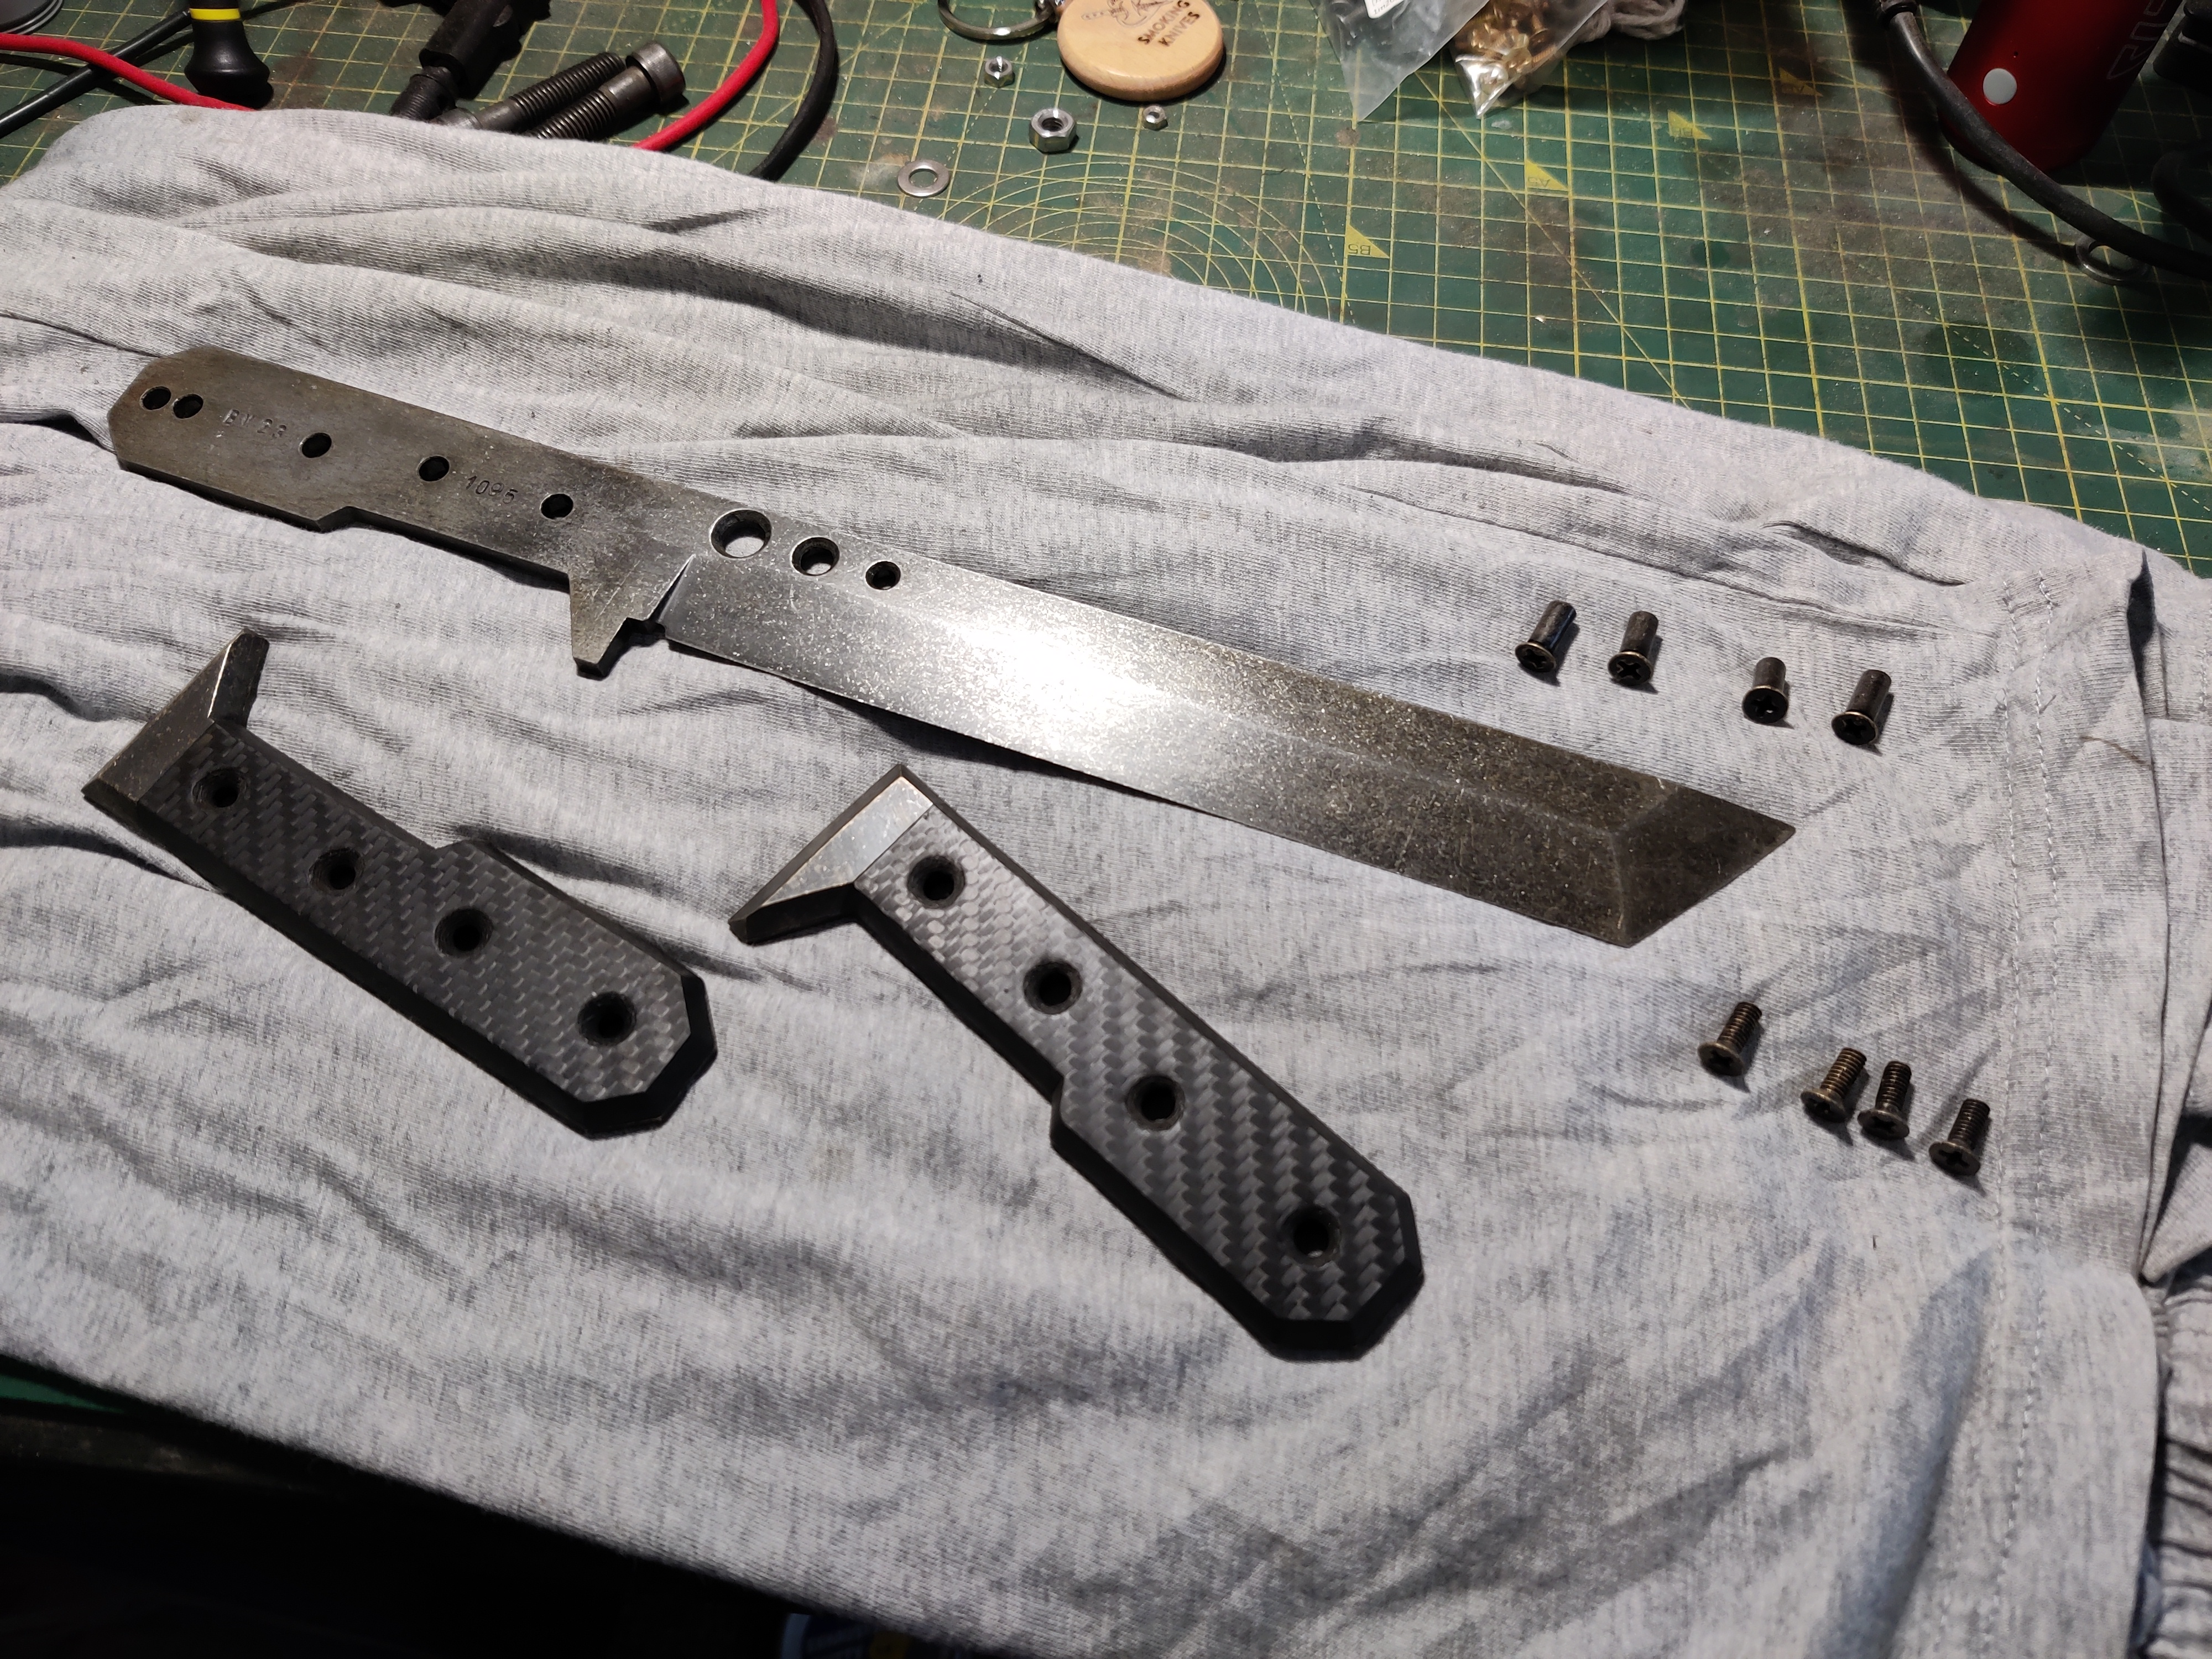 an image of a knife about to be put together